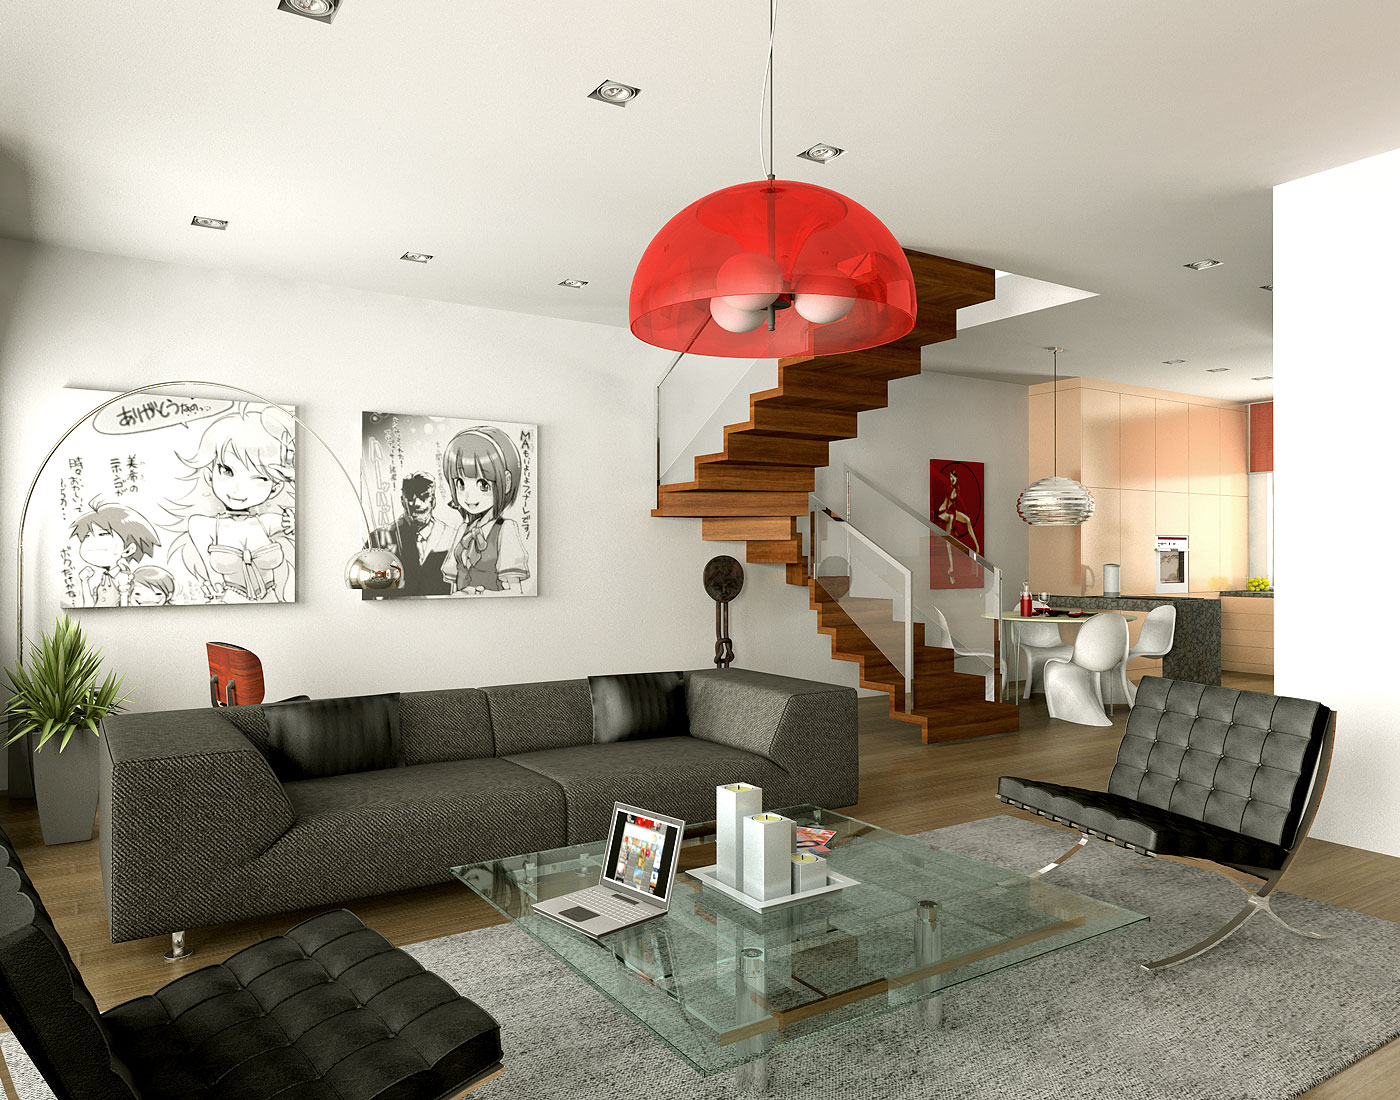 Modern Living With Dazzling Modern Living Room Decor With Big Pendant Lamp Furnished With Sofa And Black Tufted Armless Chairs Completed With Glass Table On Thick Rug Living Room Beautifying Living Room Decor Through The Right Room Spots